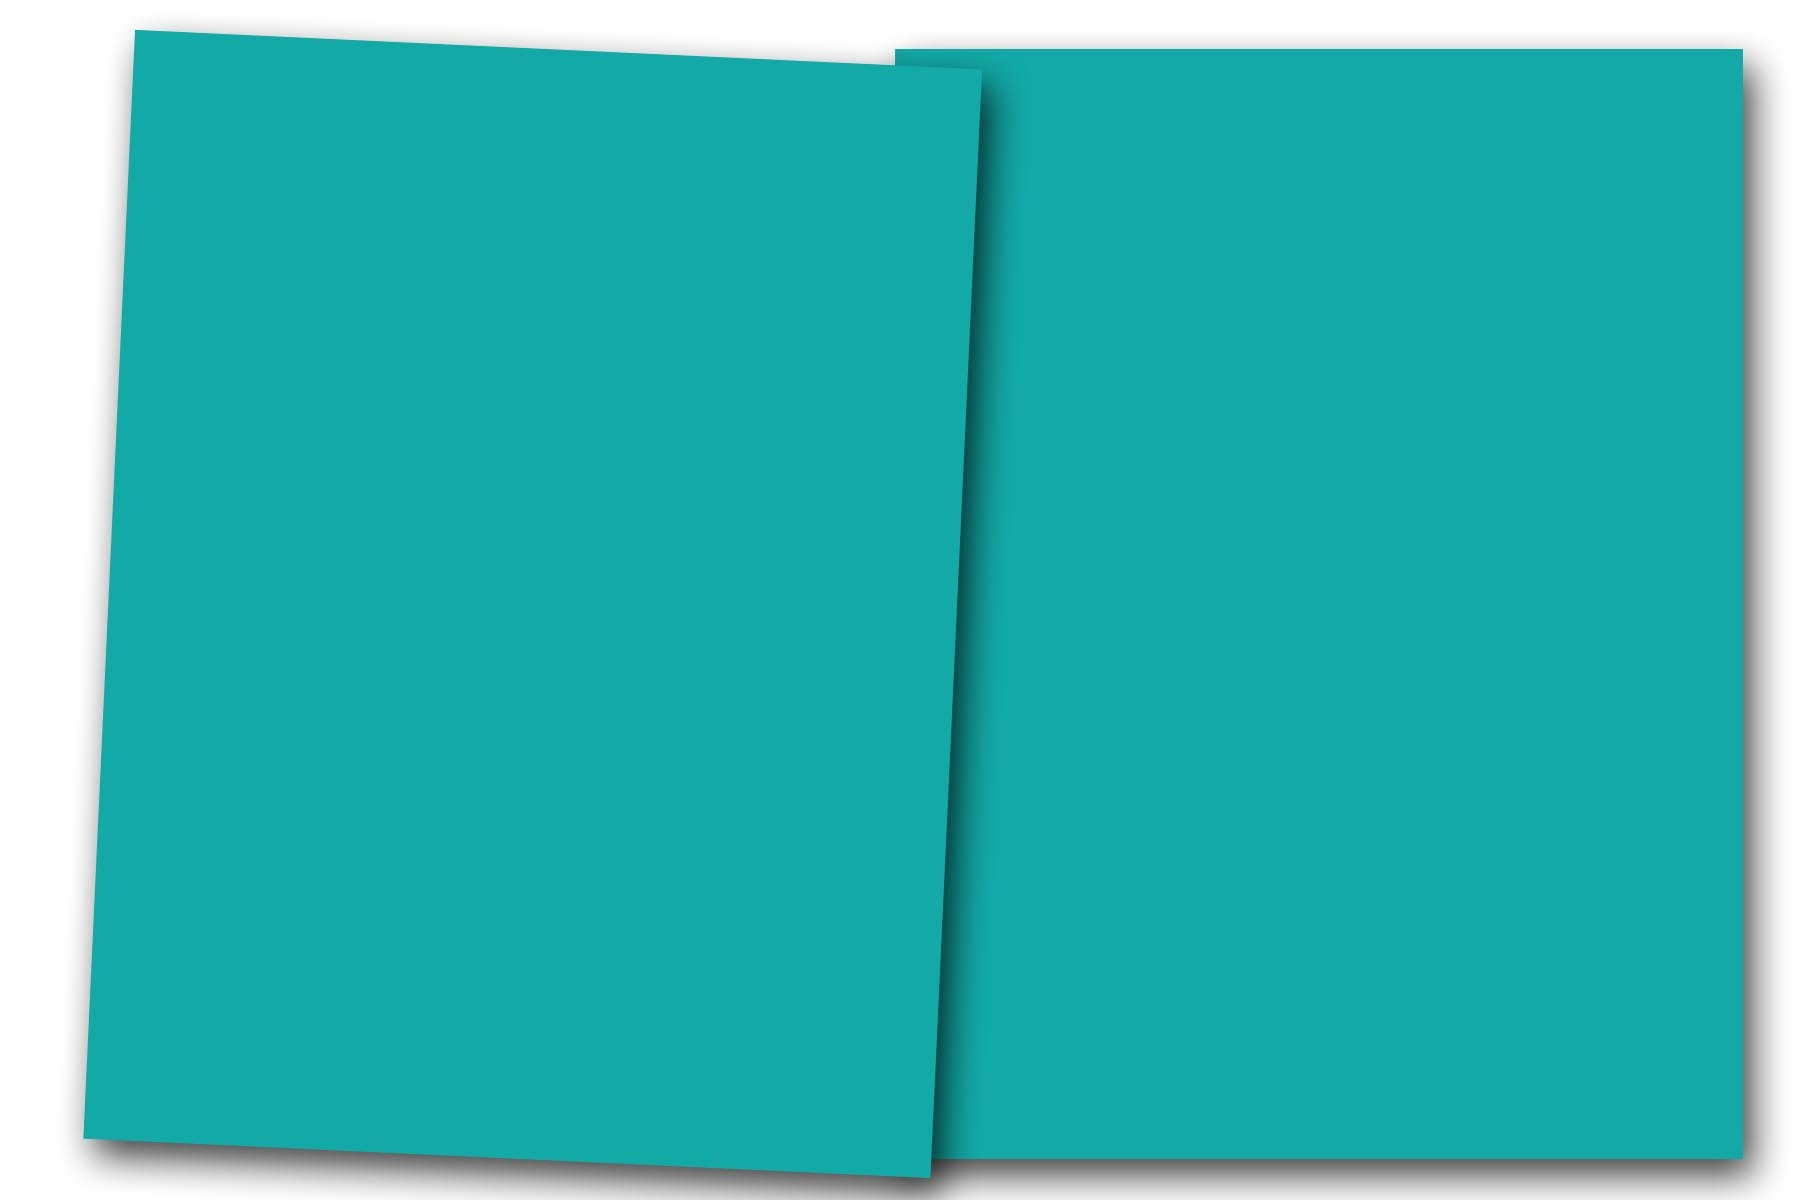 Soft Blue 12x12 CardStock for DIY Cards, Diecutting and paper crafting -  CutCardStock